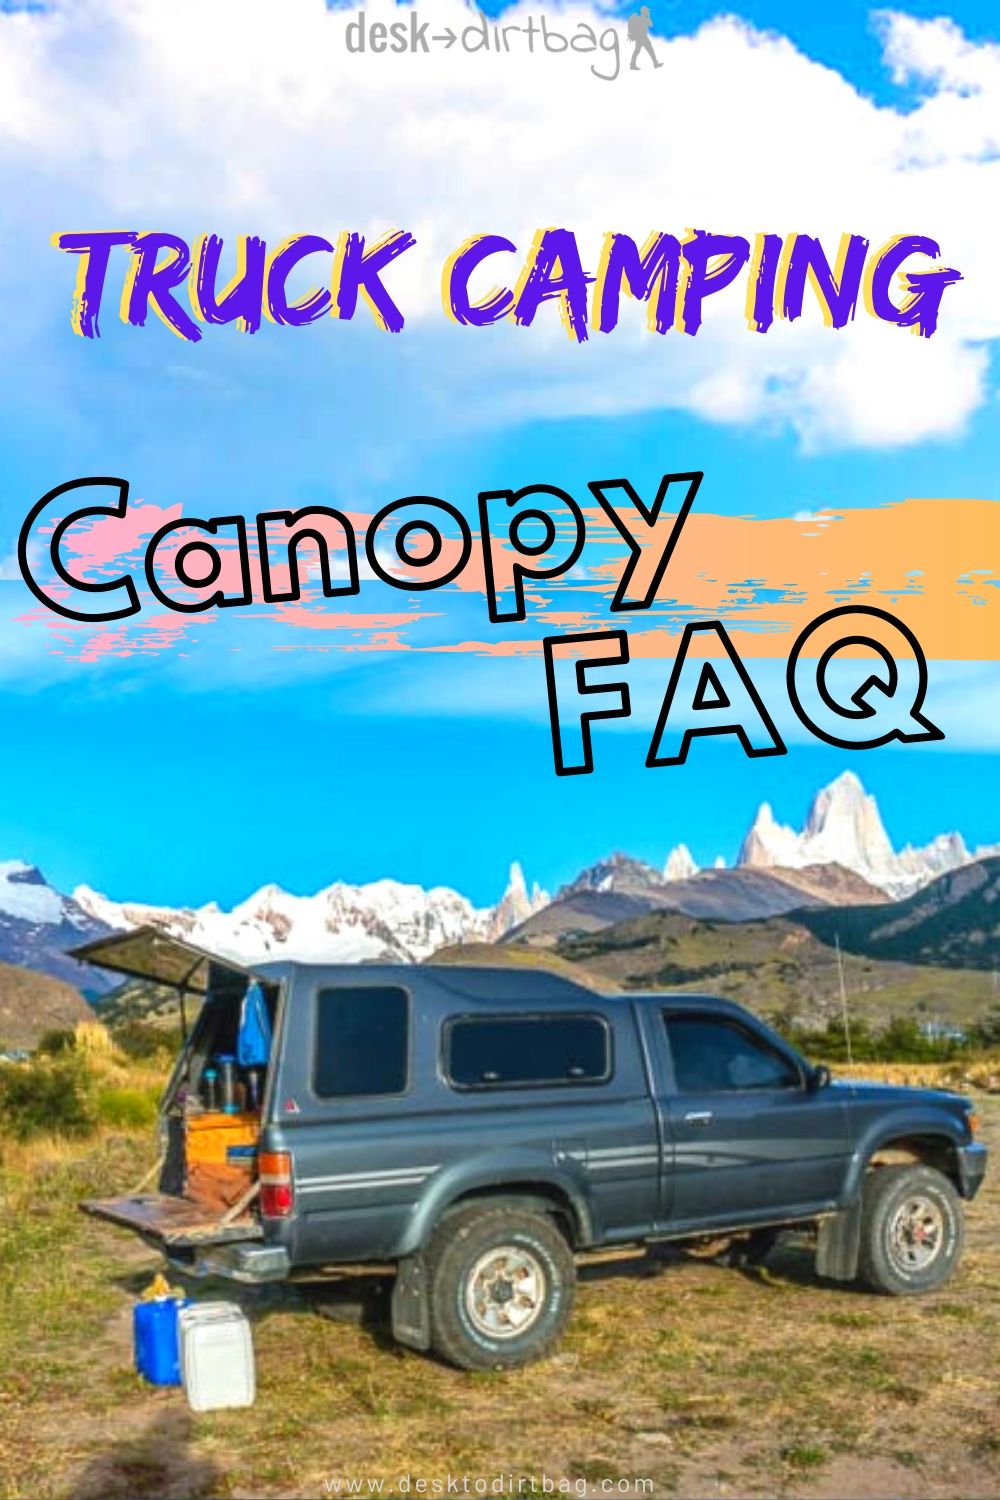 Pickup Truck Canopy Camping Frequently Asked Questions truck-camping